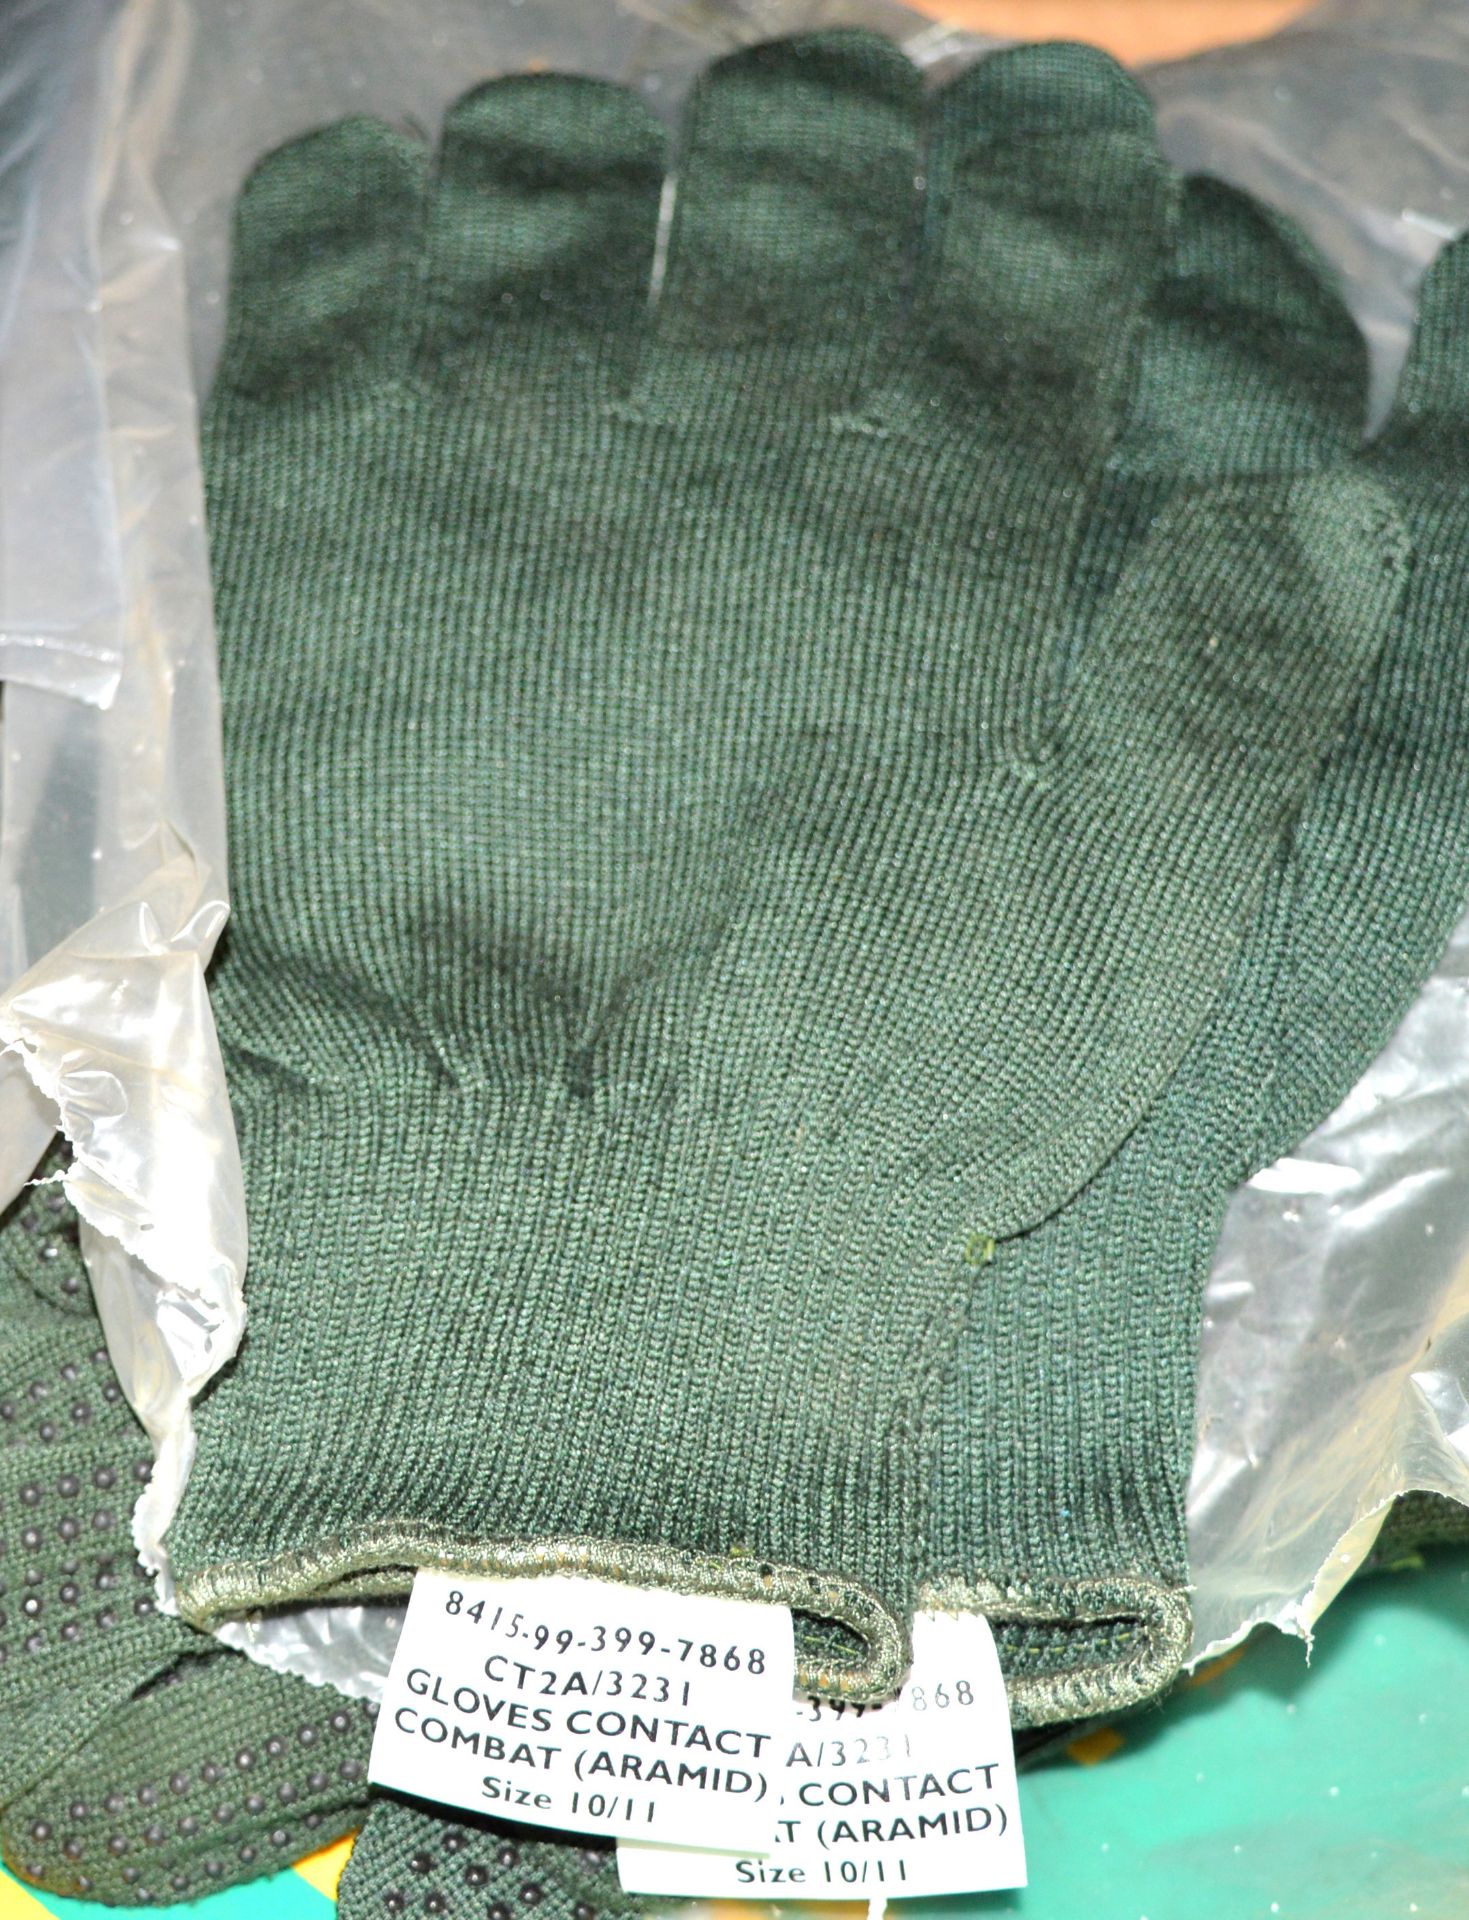 Approx 34x Pairs Gloves - Sizes 10/11. - Image 2 of 2